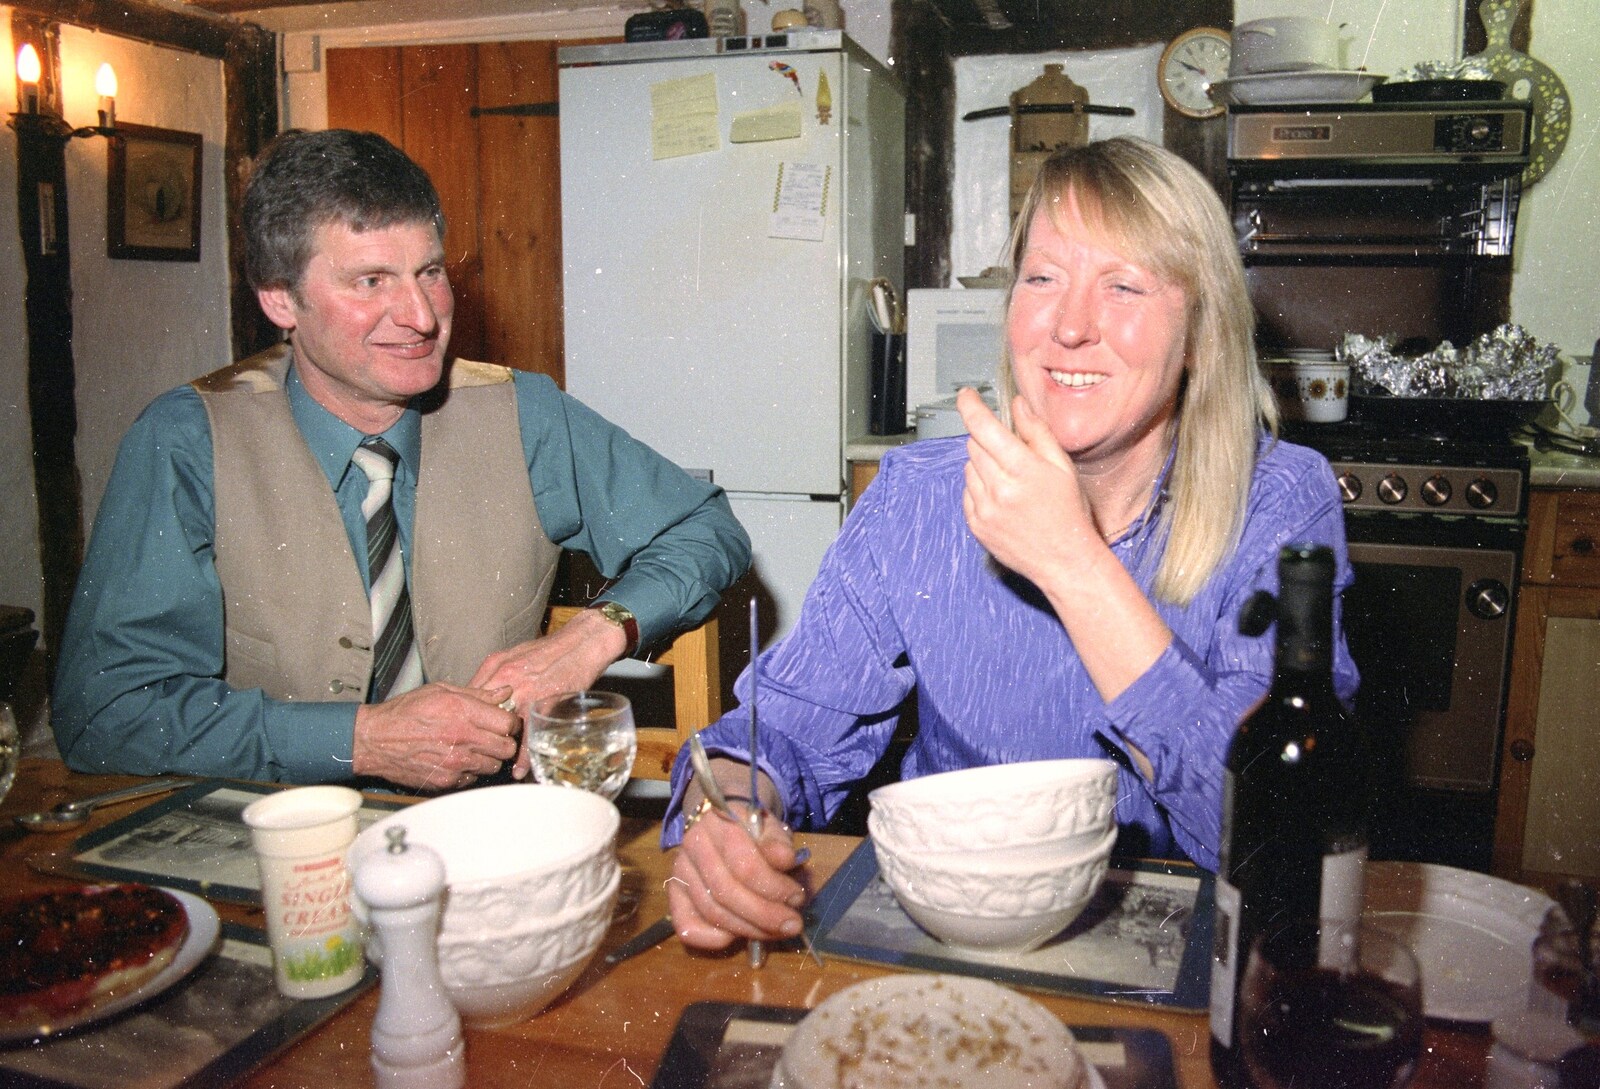 Sue with a stack of bowls from Lunch and Dinner at Mad Sue's, Stuston, Suffolk - 30th March 1995